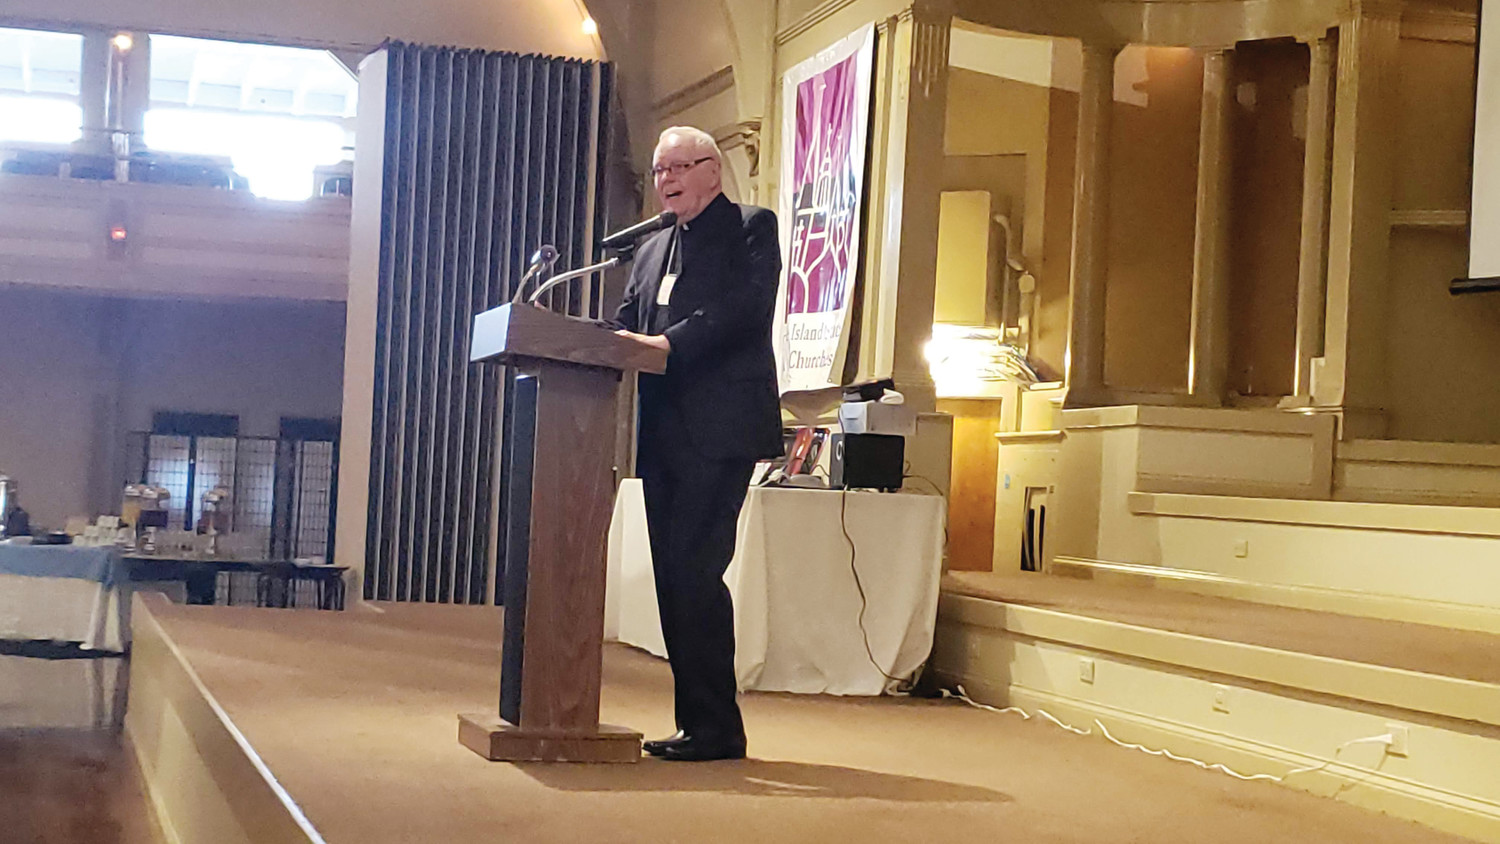 Father Raymond Malm addresses the audience at the ninth annual Heroes of Faith Breakfast after receiving the Reverend Hebert Bolles Life Achievement Award from the Rhode Island State Council of Churches.